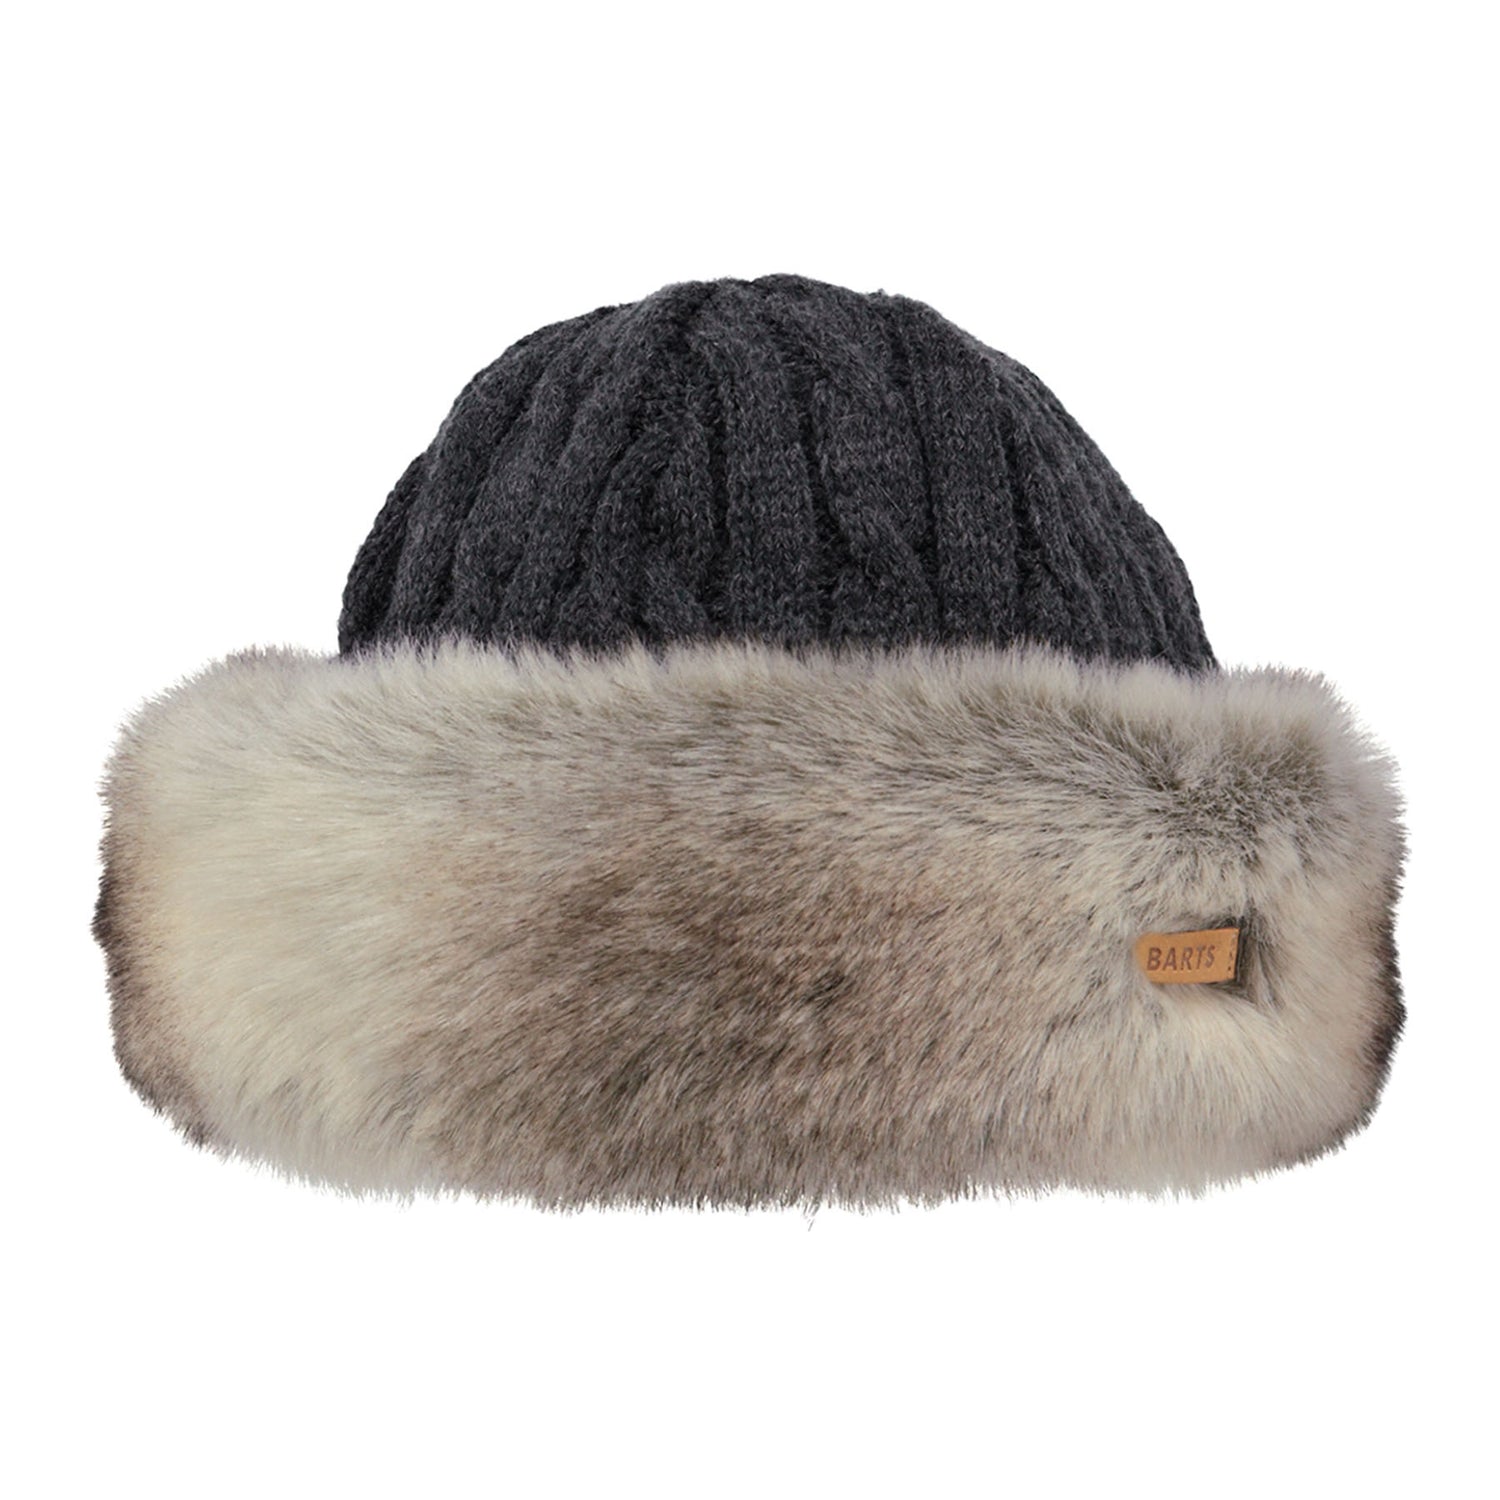 Barts Women's Warm Fur Cable Band Hat 